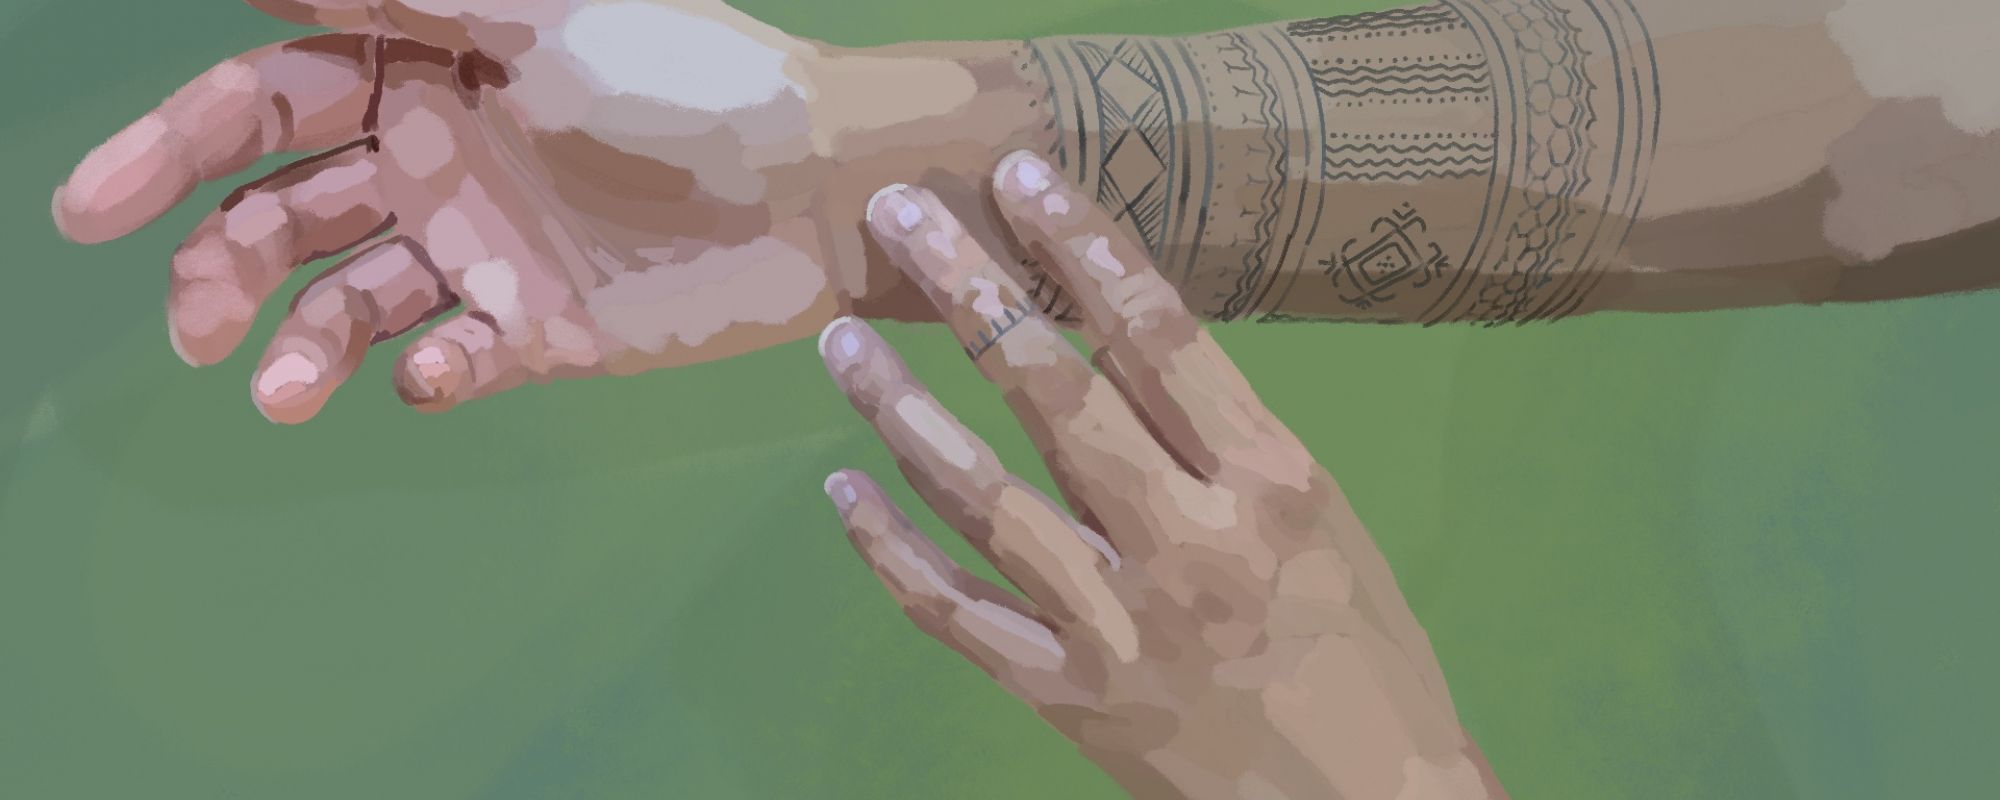 two hands are shown with tattoos with a green background